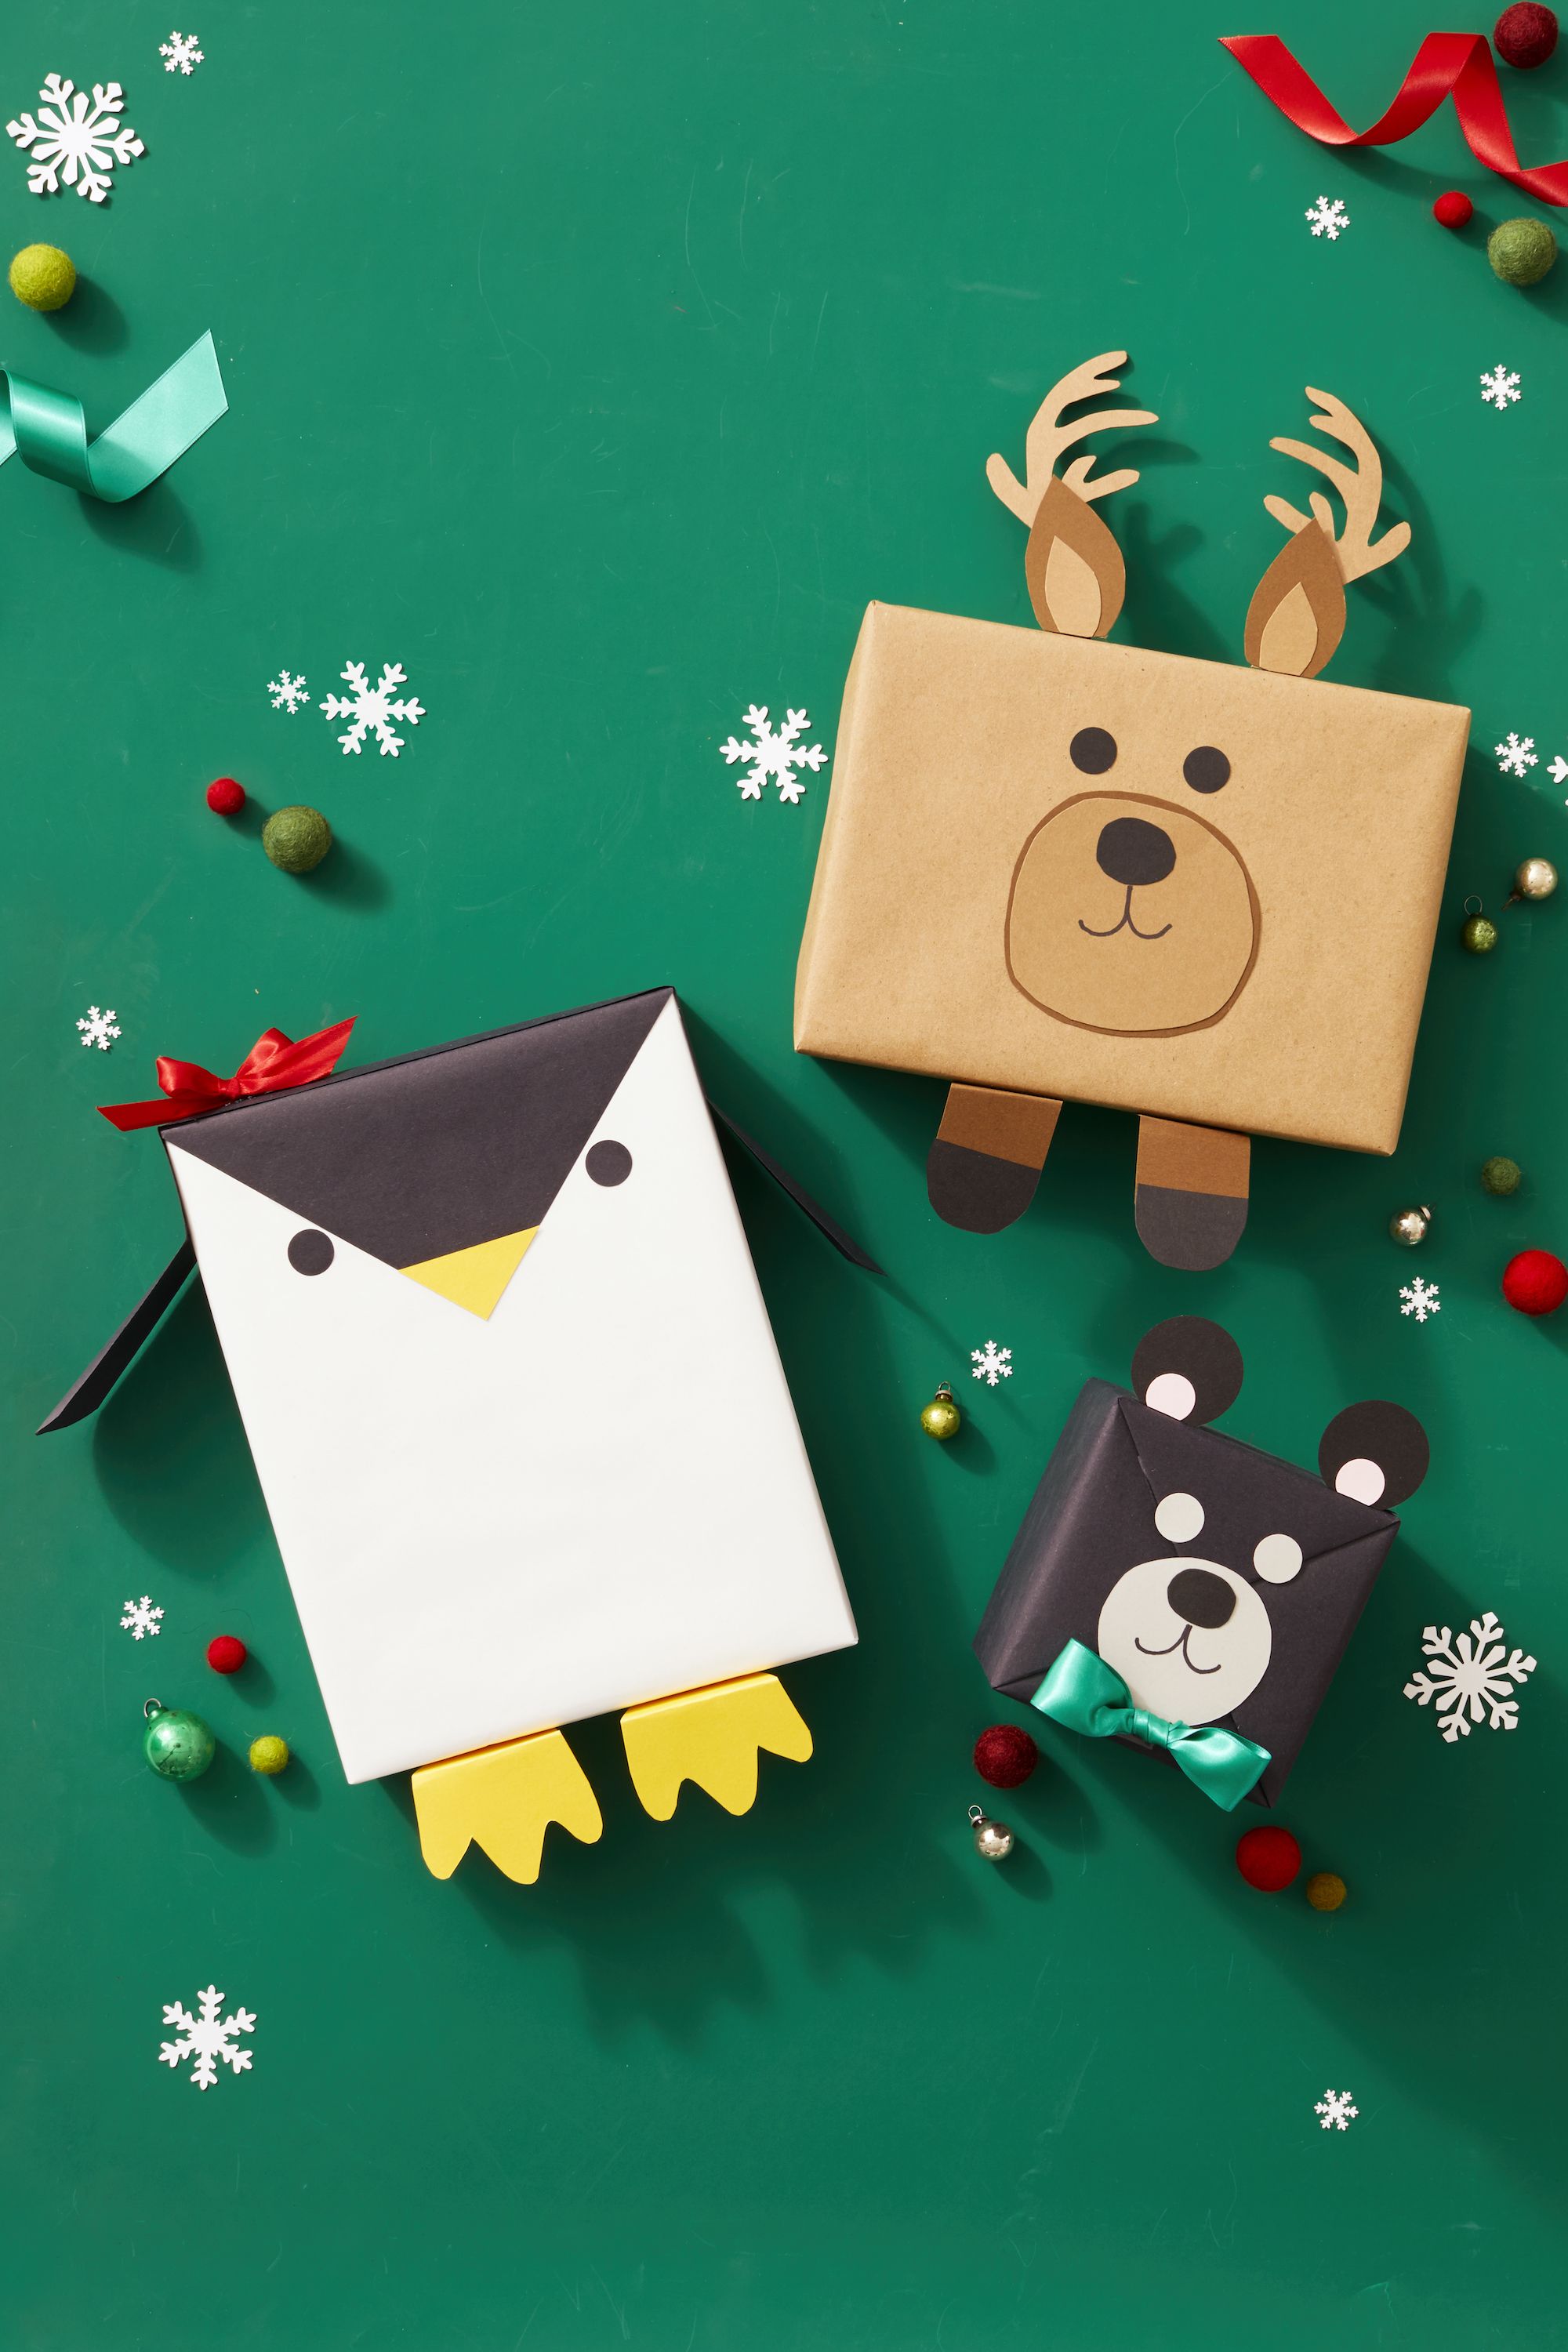 Cute Gift Wrap & Holiday Decor from Amazon • BrightonTheDay